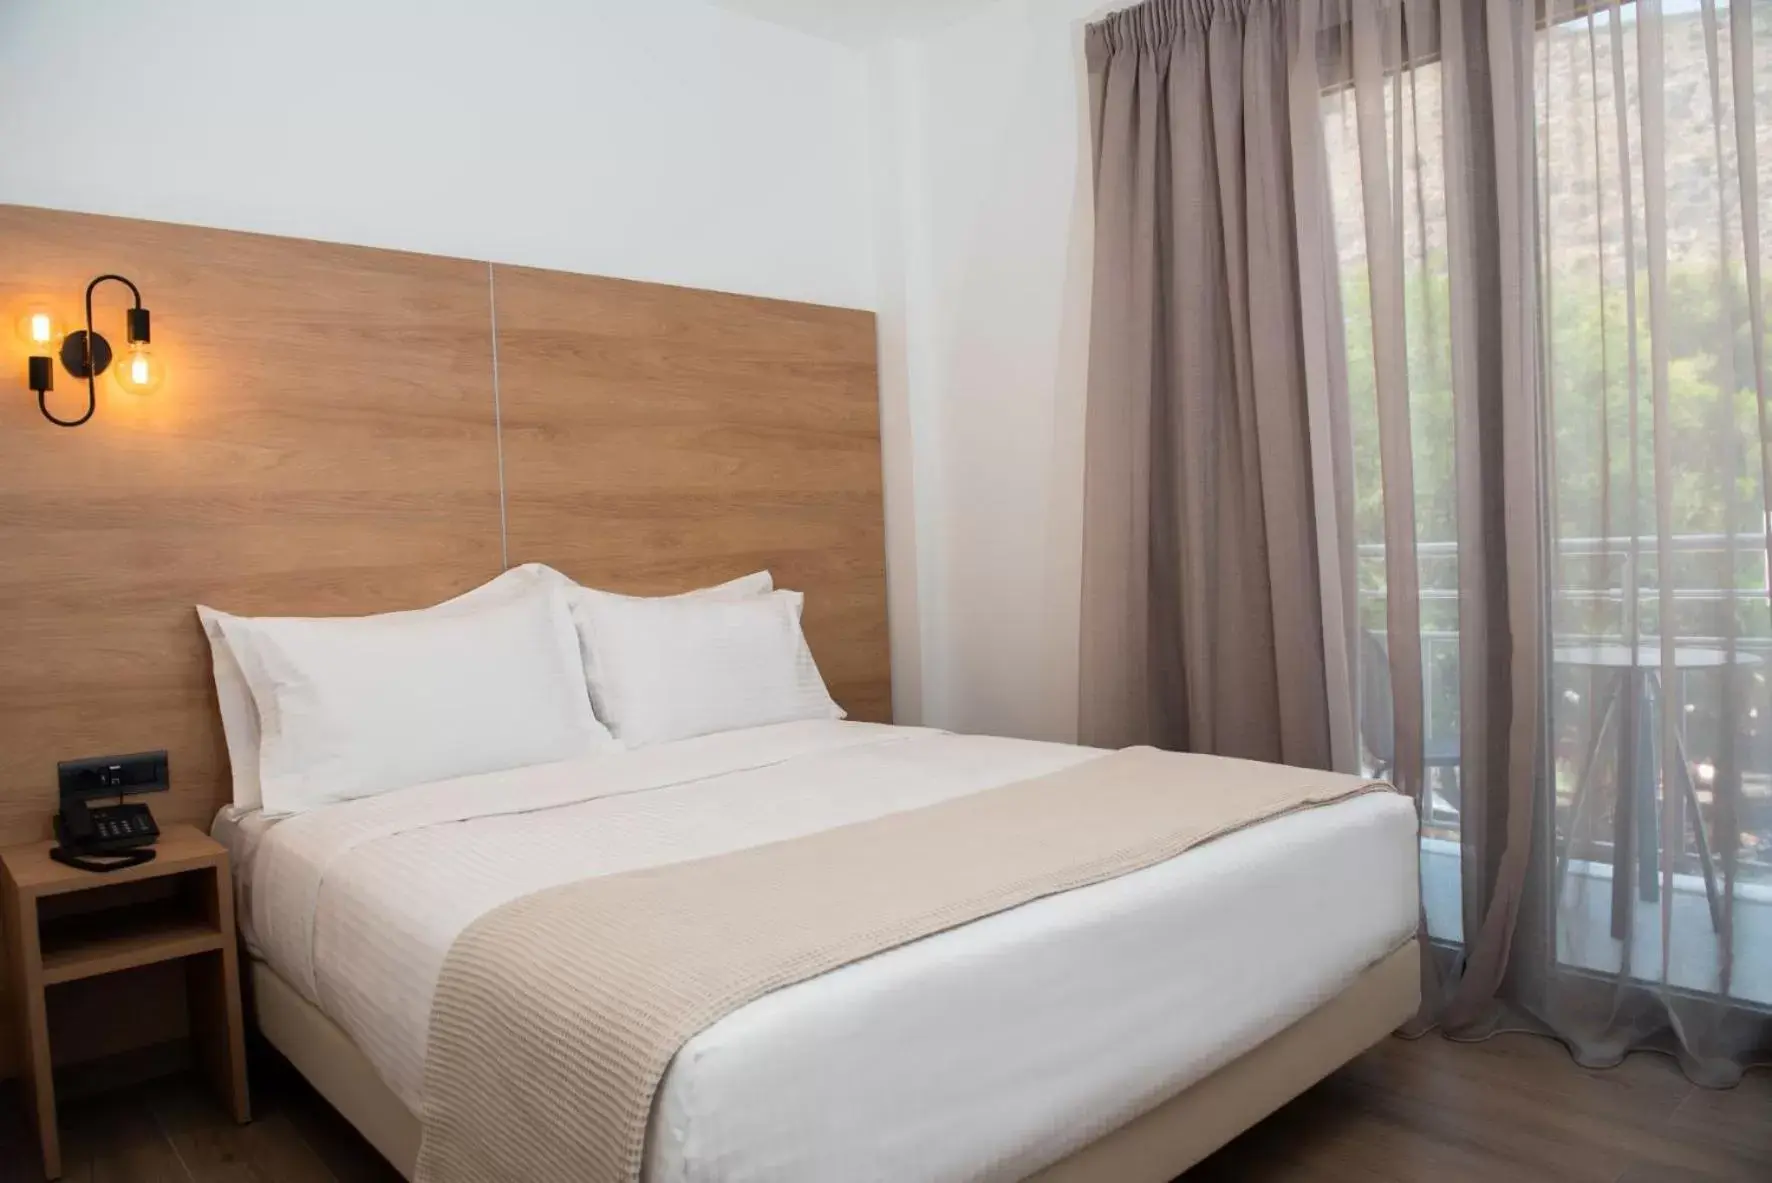 Bed in Liberty of Nafplio